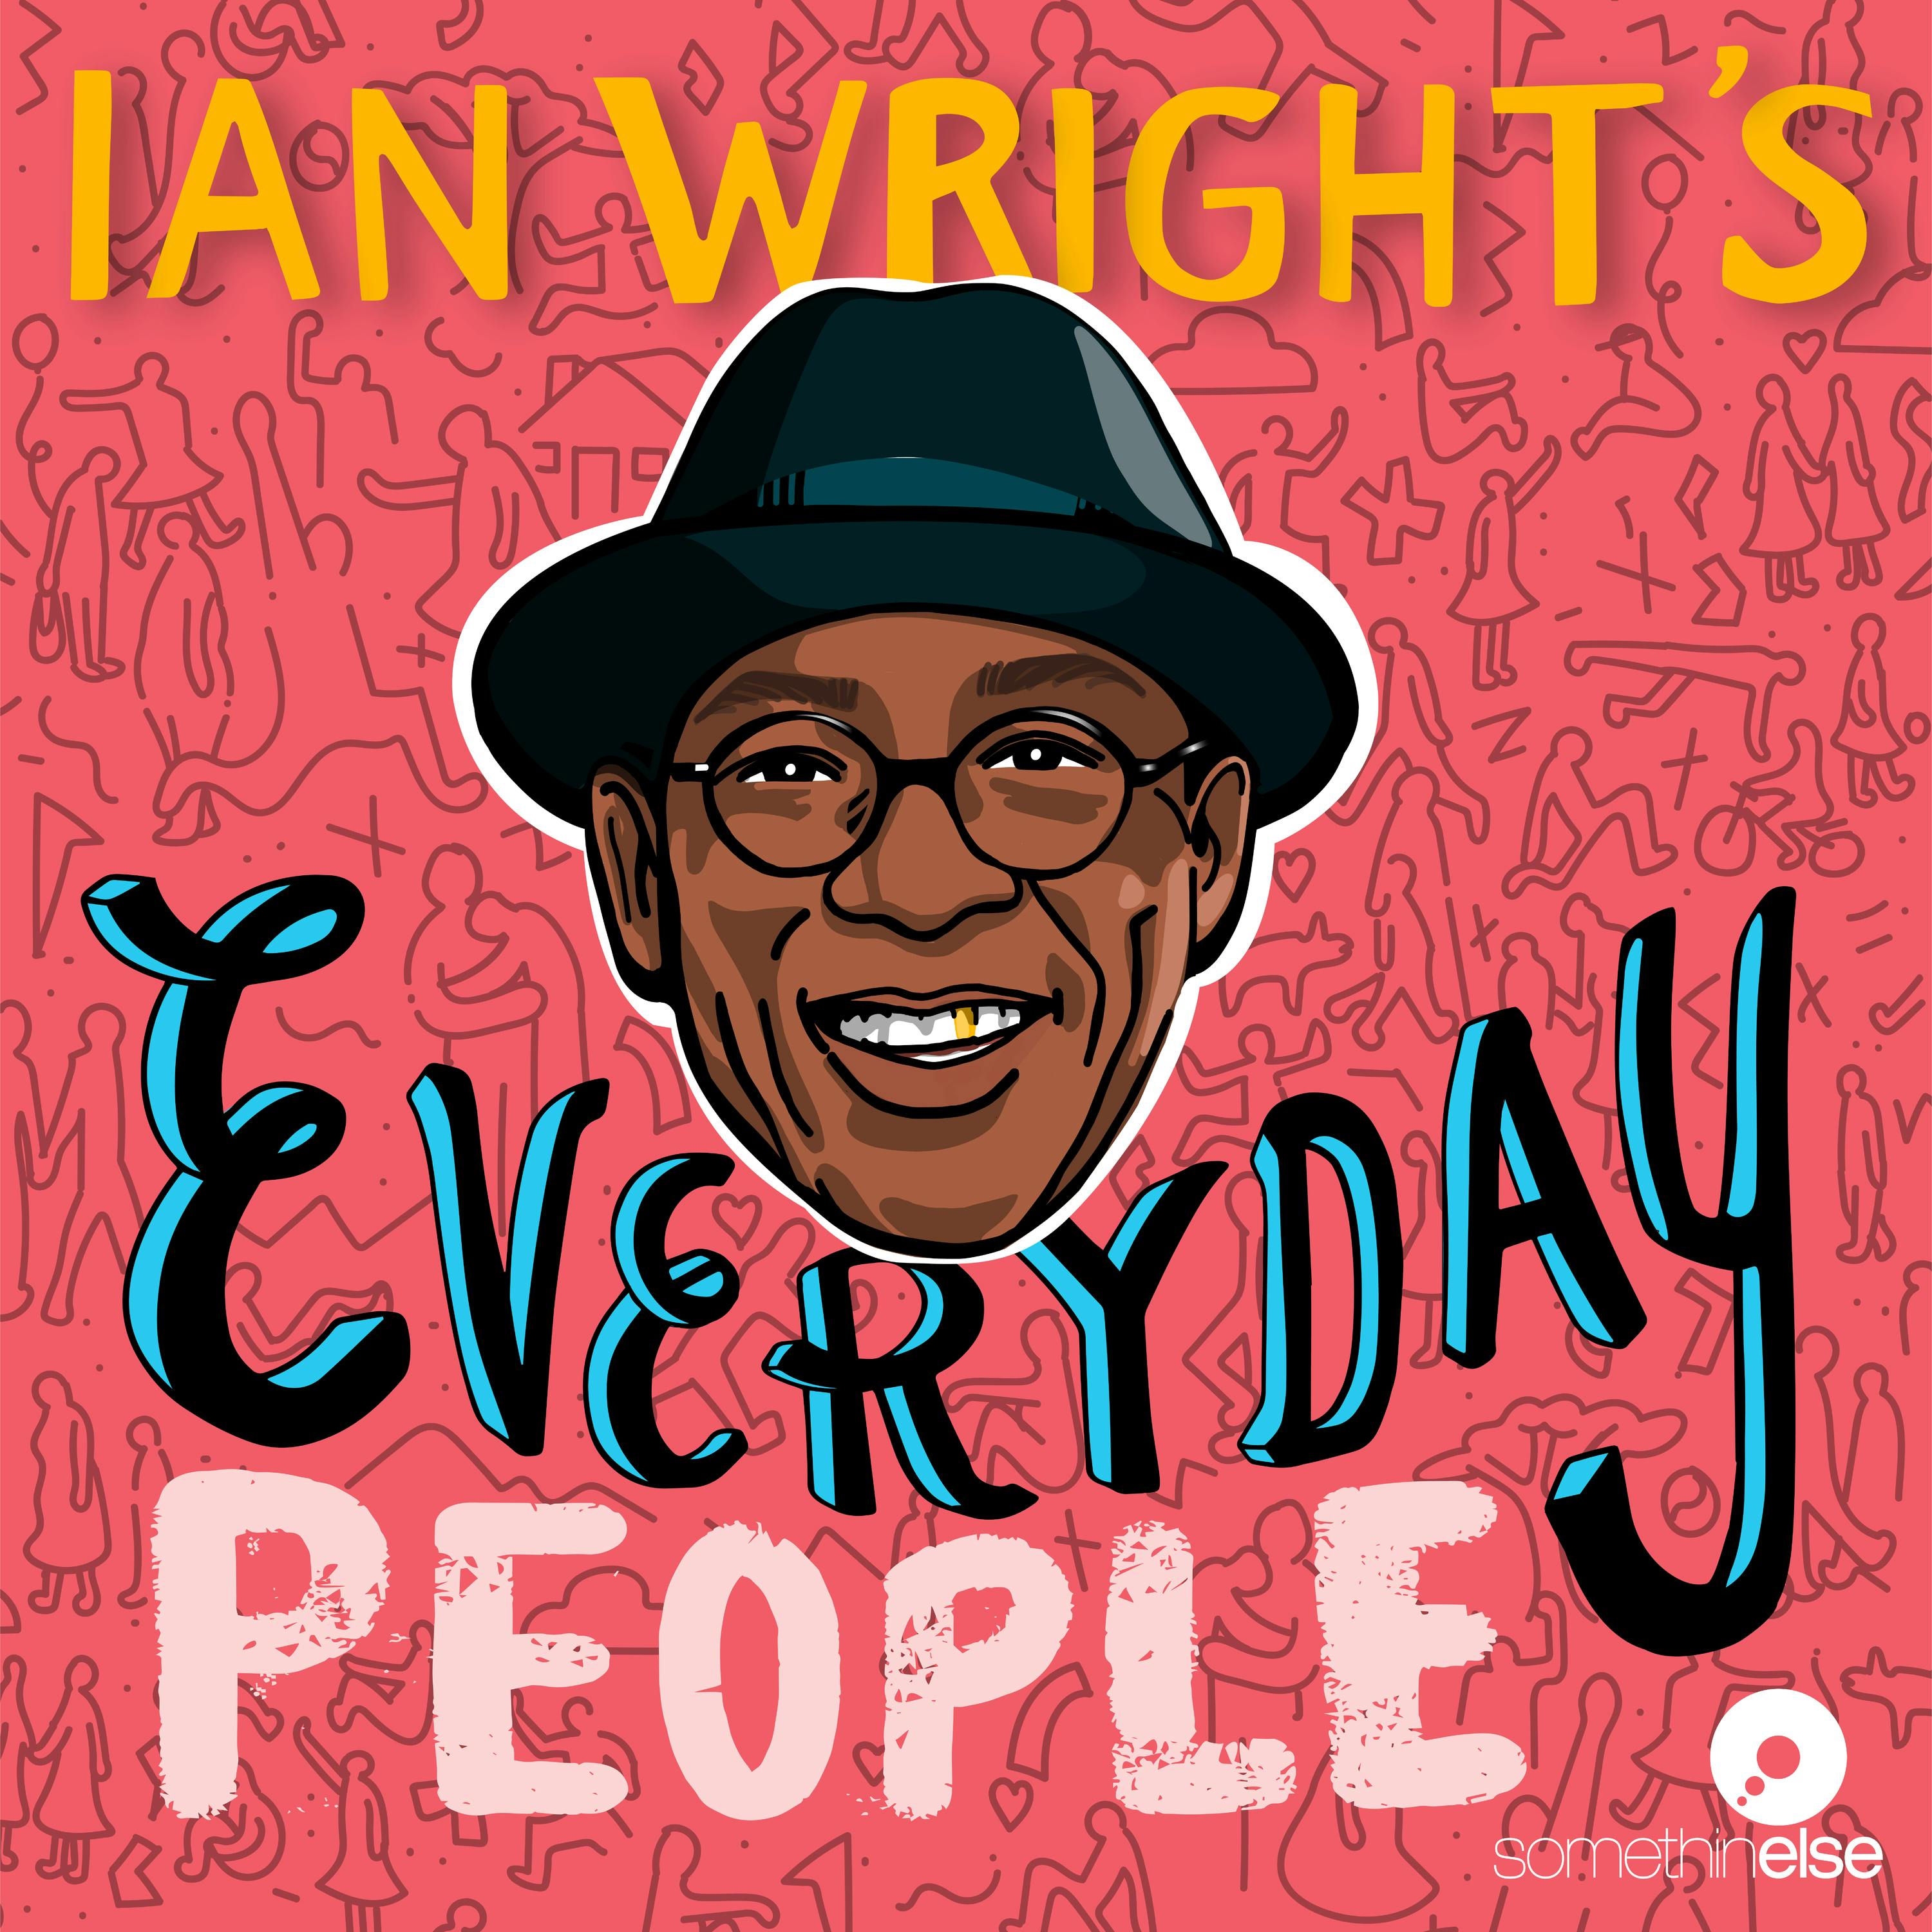 Introducing... Ian Wright's Everyday People!